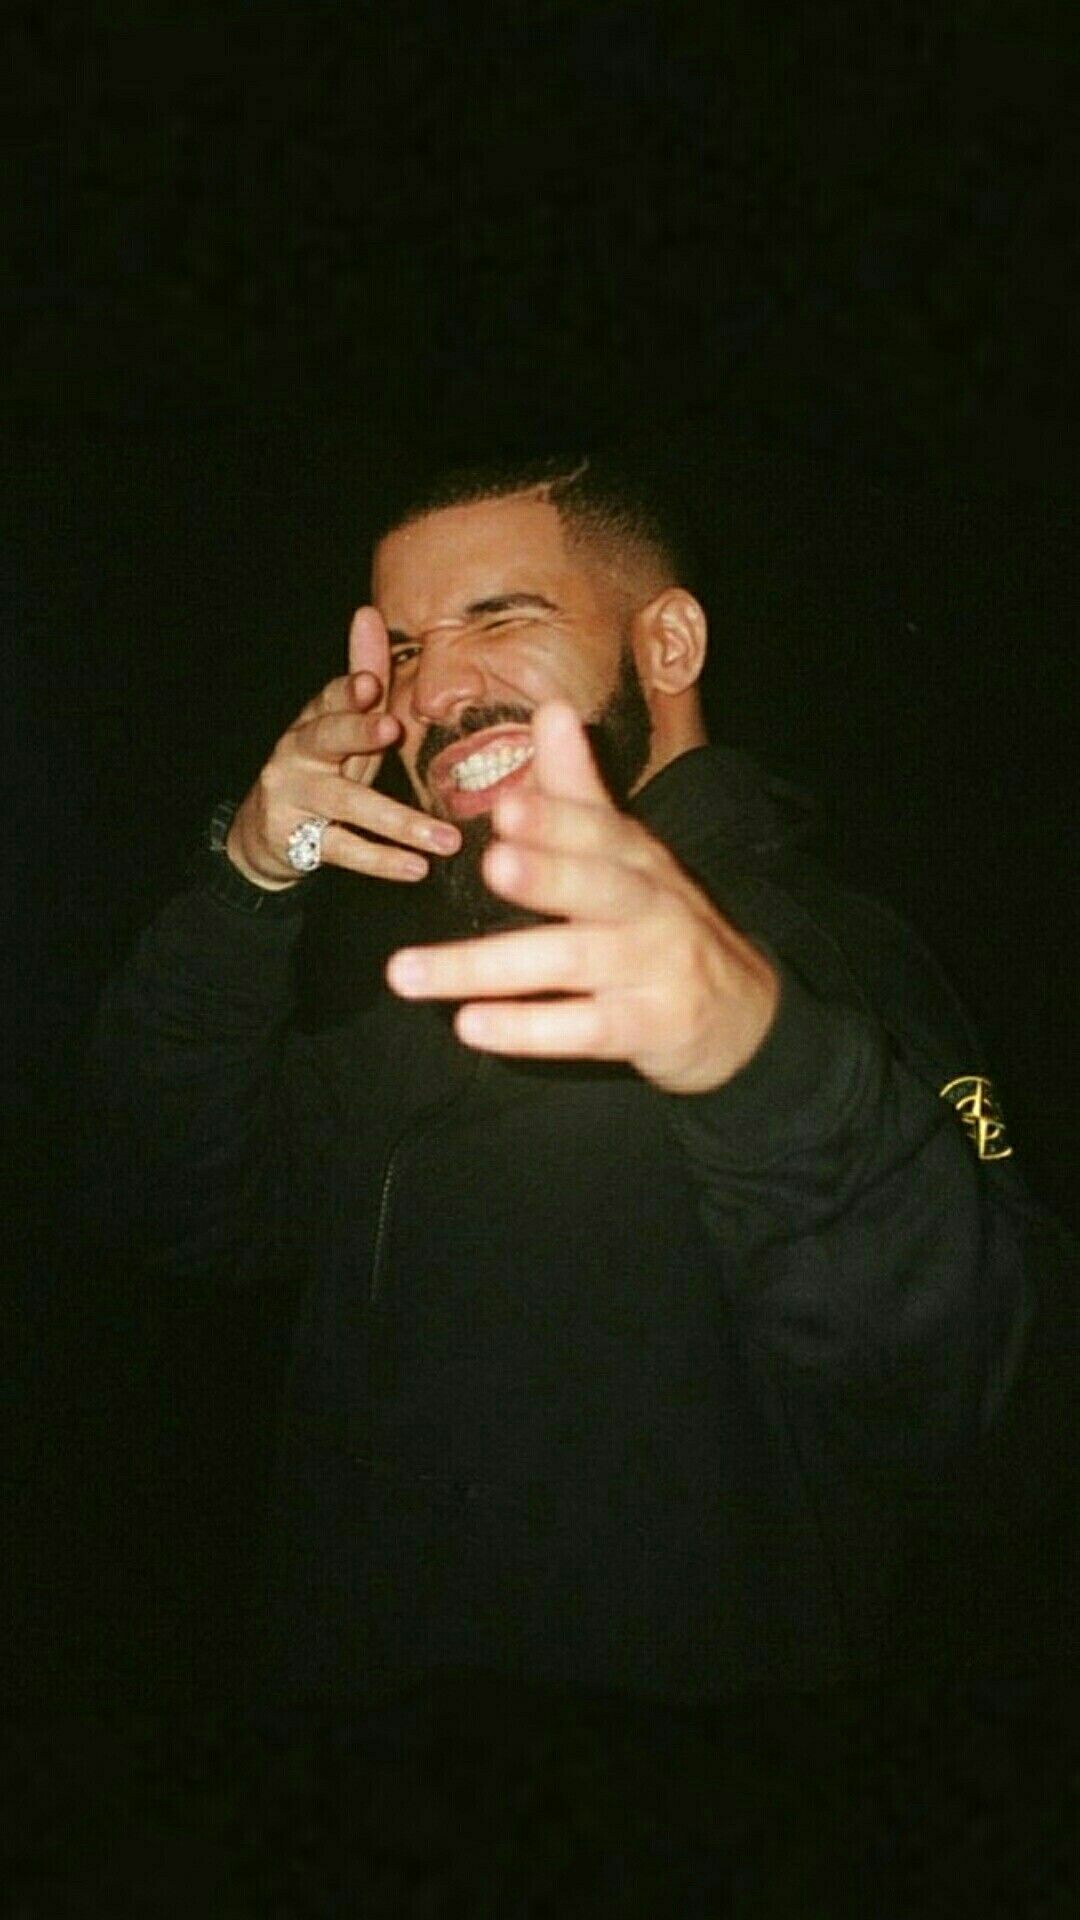 Drake: Single “Over”, A nomination for Best Rap Solo Performance at the 53rd Grammy Awards. 1080x1920 Full HD Background.